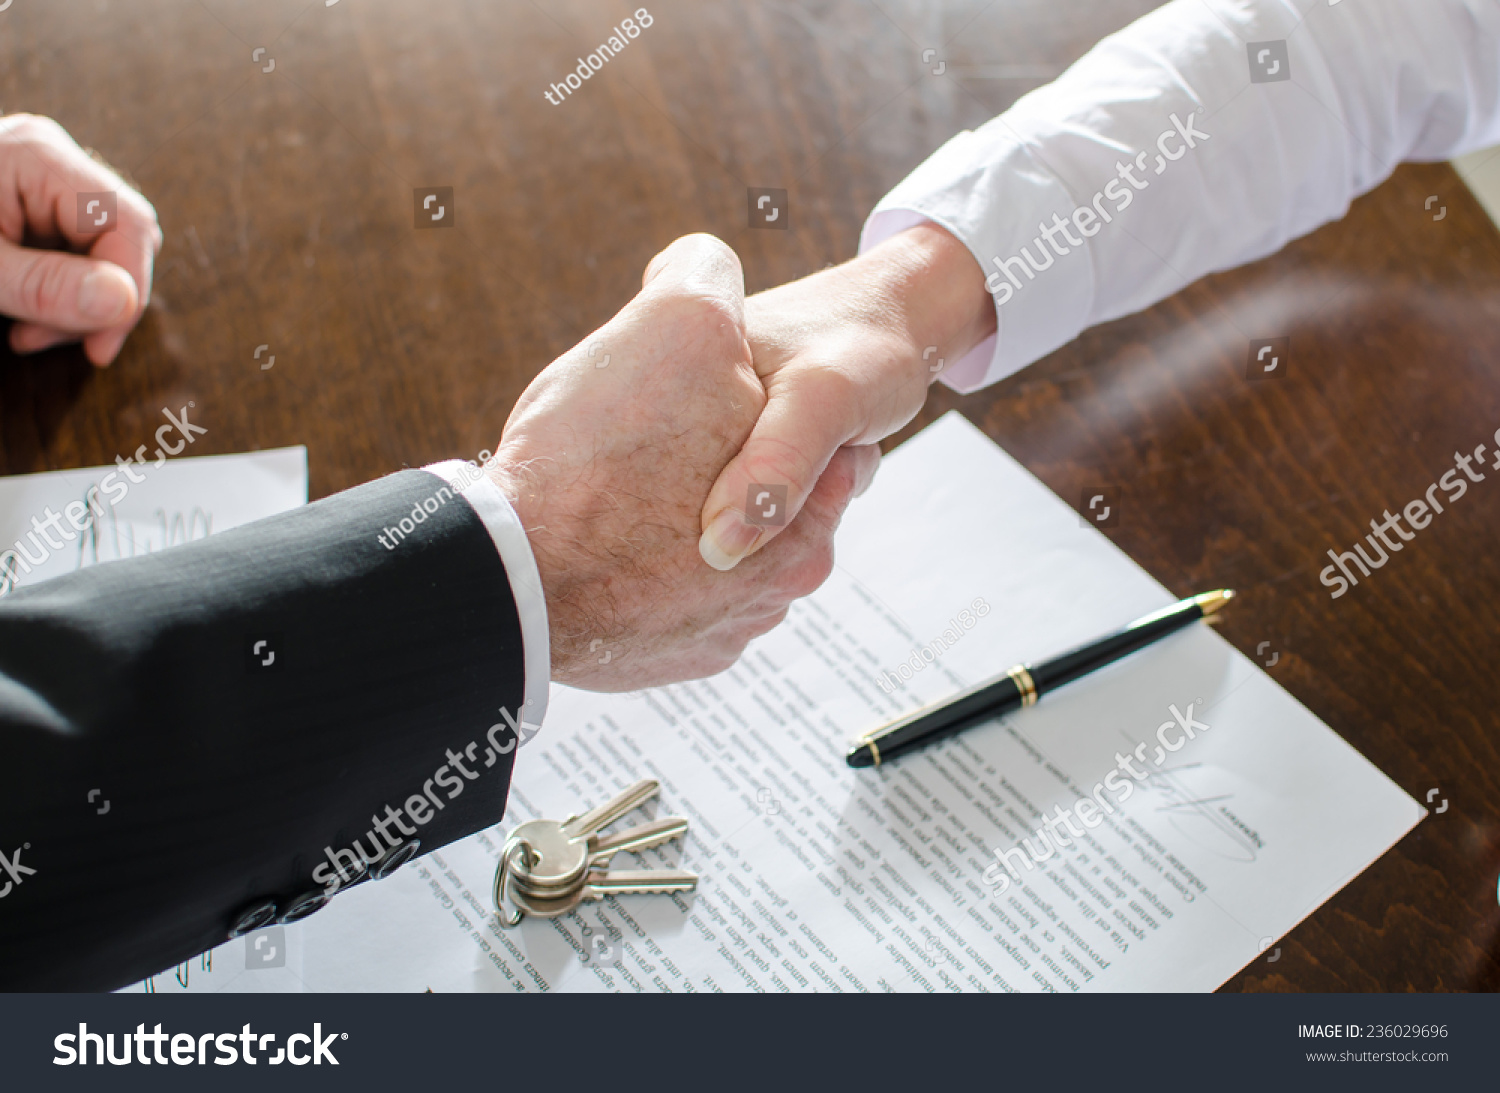 Estate agent shaking hands with his customer after contract signature #236029696